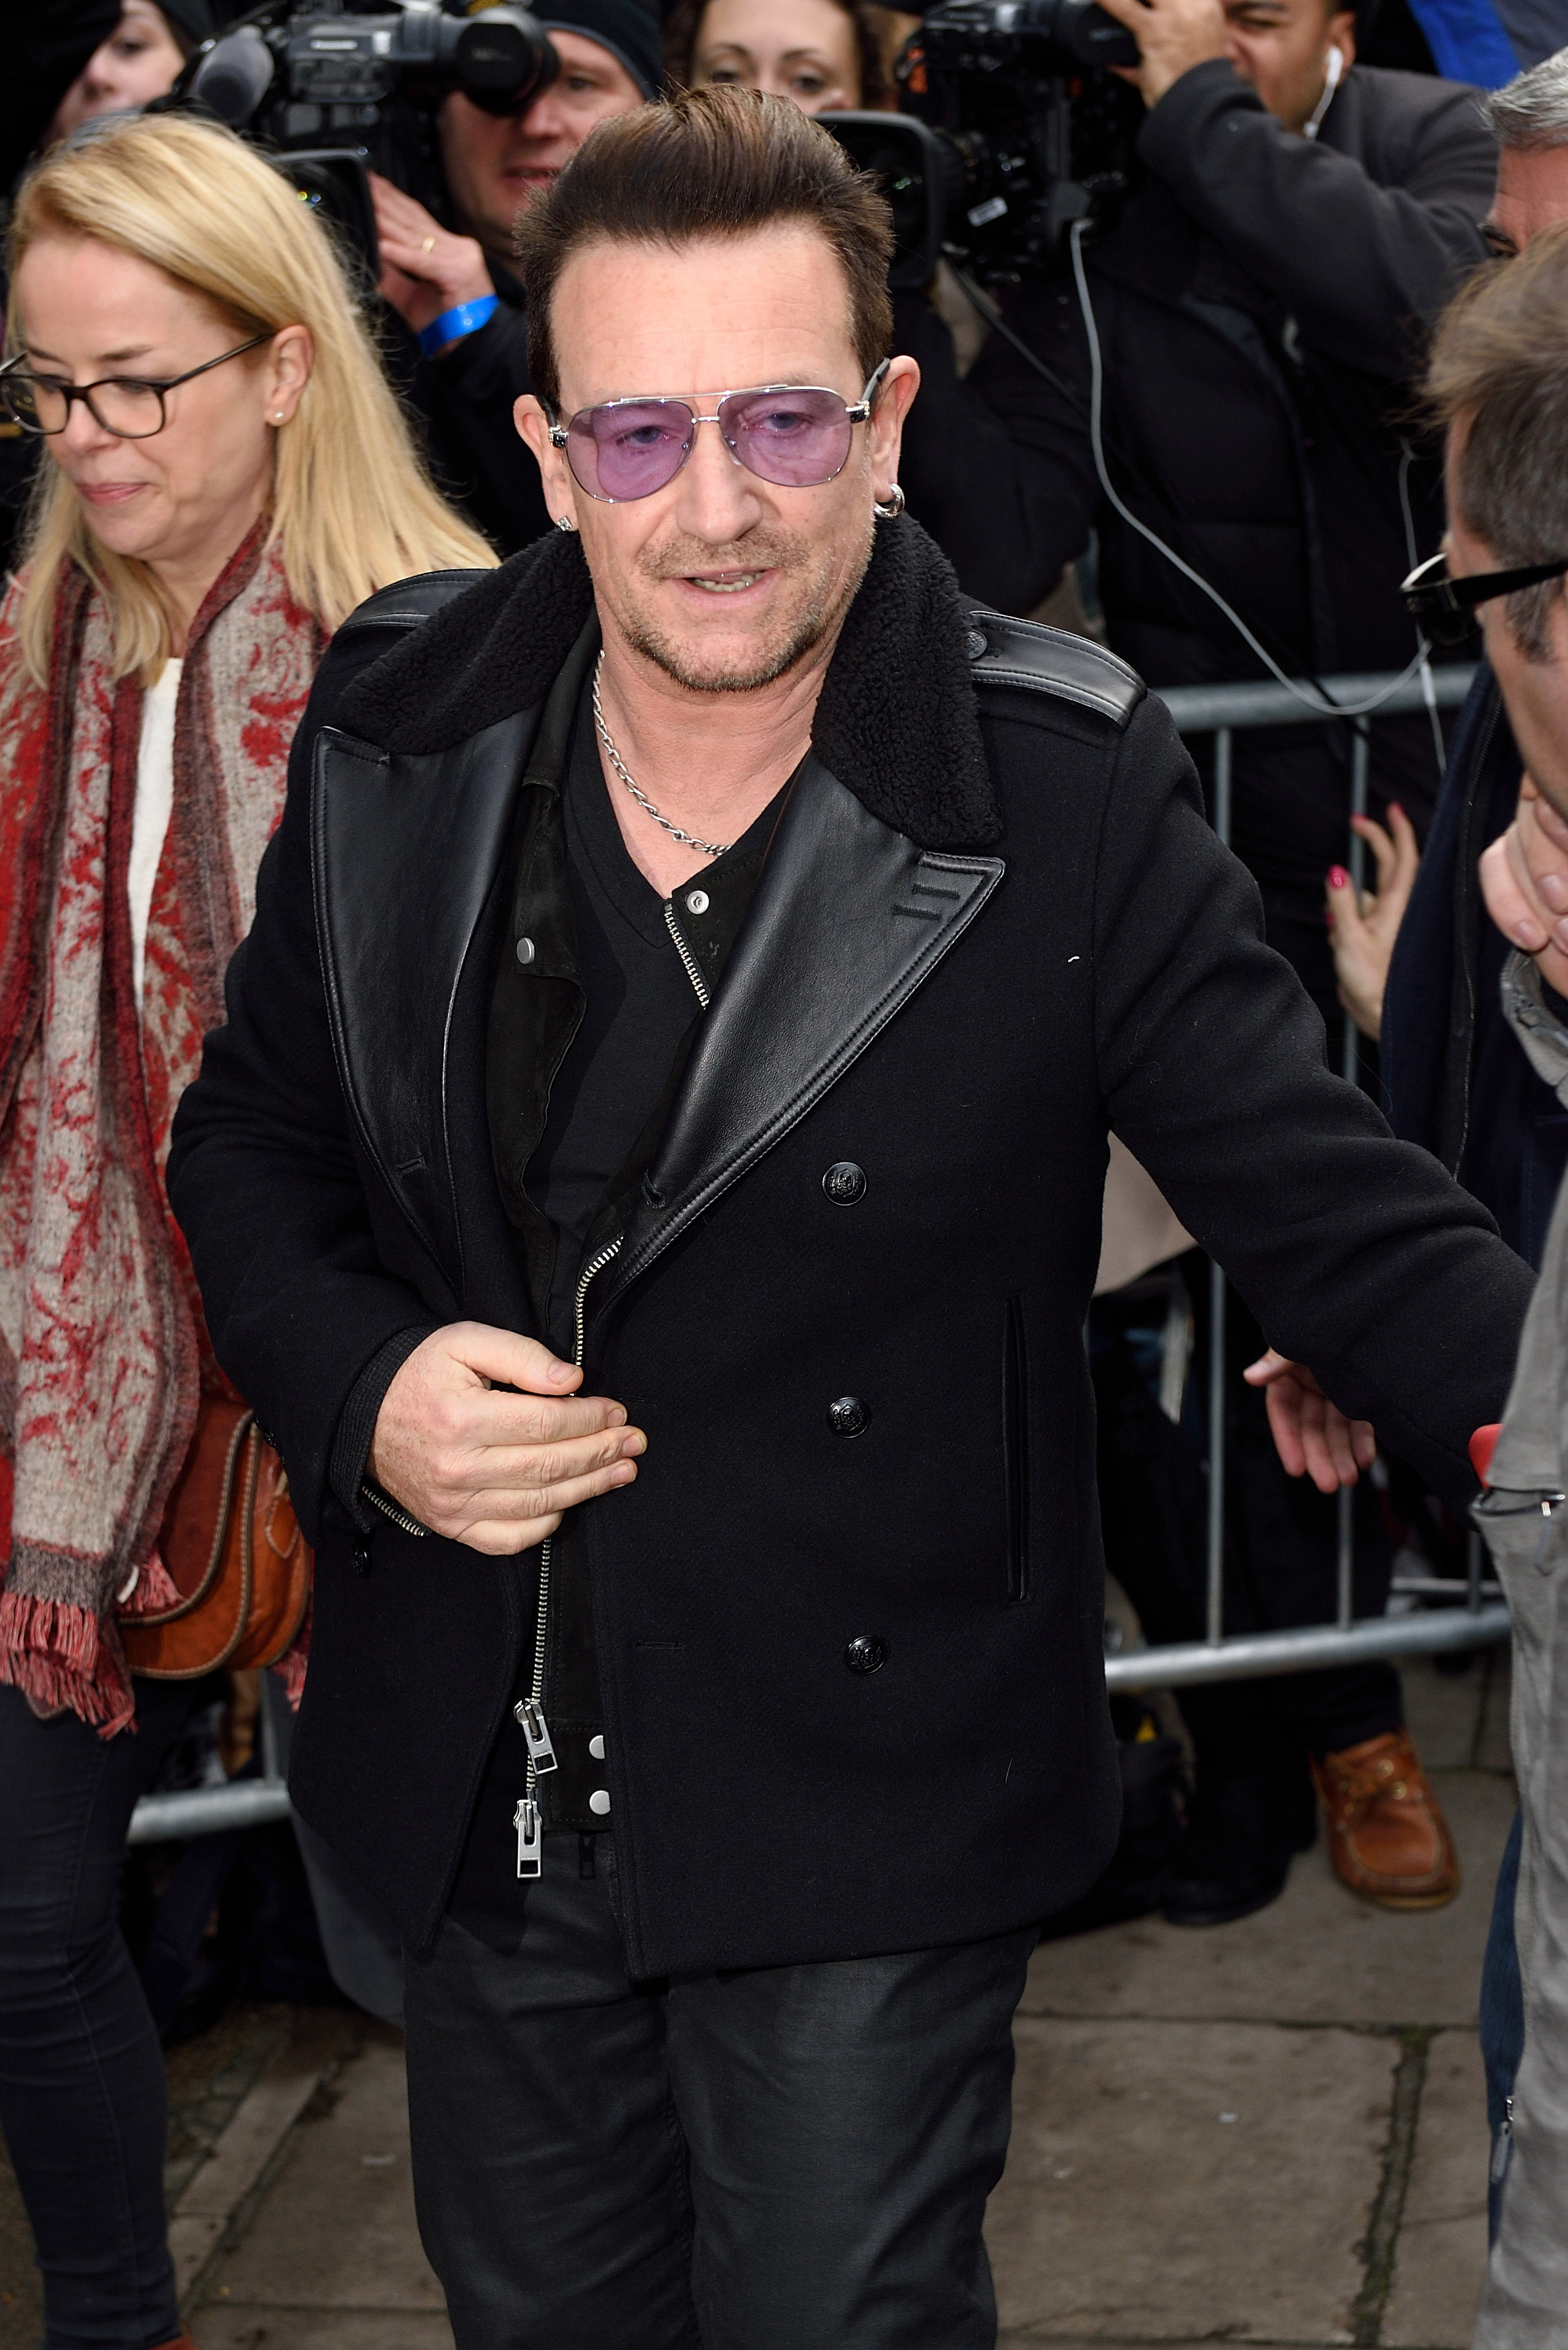 Bono attends to record the Band Aid 30 single on November 15, 2014 in London, England. (Karwai Tang&mdash;WireImage/Getty Images)